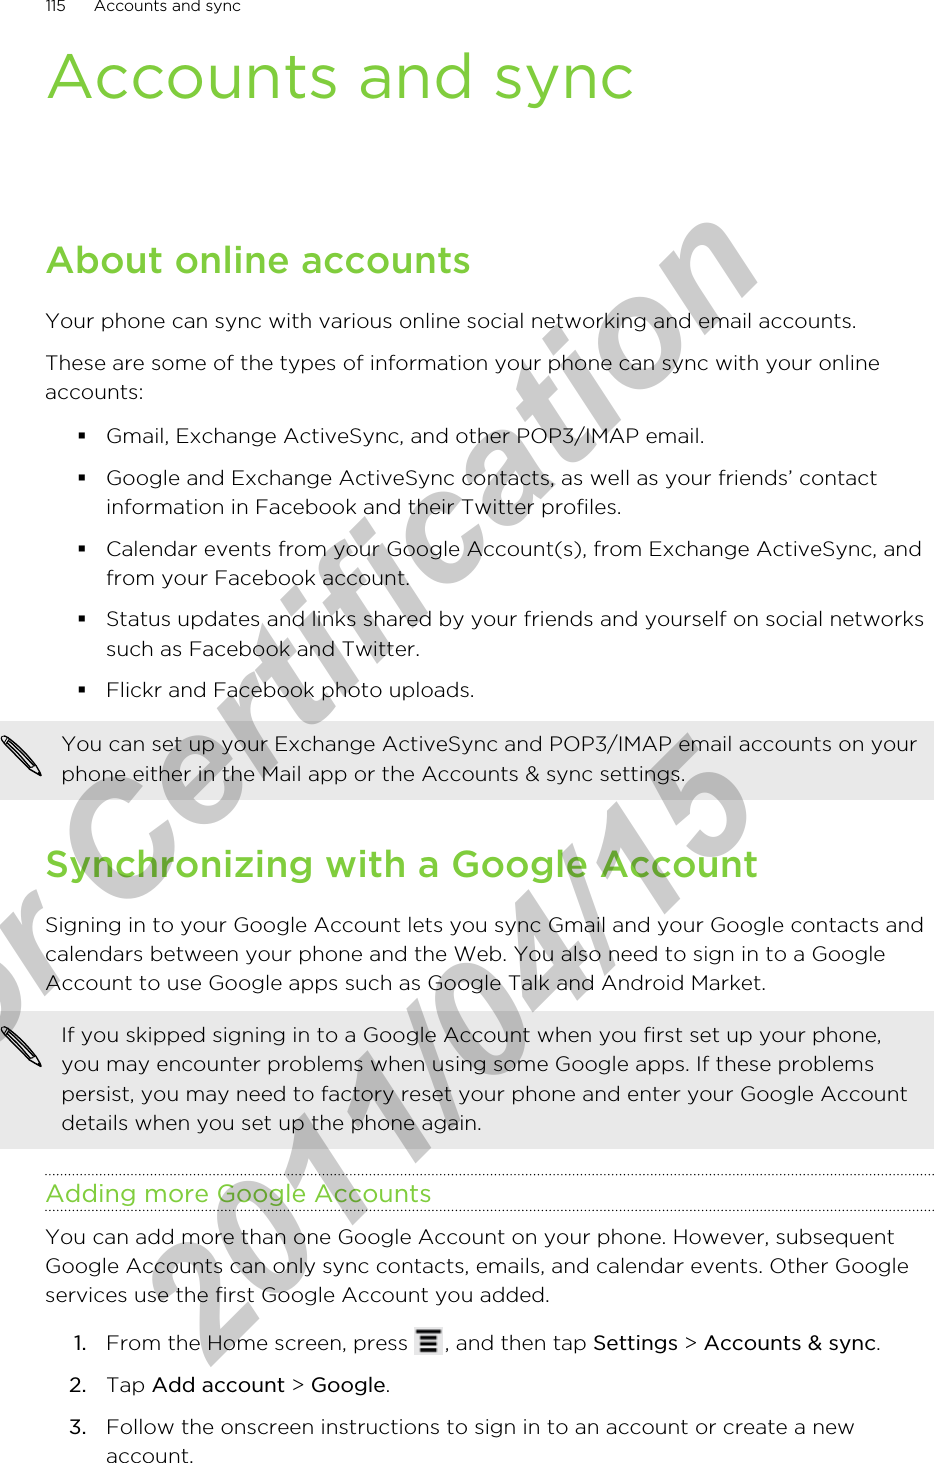 Accounts and syncAbout online accountsYour phone can sync with various online social networking and email accounts.These are some of the types of information your phone can sync with your onlineaccounts:§Gmail, Exchange ActiveSync, and other POP3/IMAP email.§Google and Exchange ActiveSync contacts, as well as your friends’ contactinformation in Facebook and their Twitter profiles.§Calendar events from your Google Account(s), from Exchange ActiveSync, andfrom your Facebook account.§Status updates and links shared by your friends and yourself on social networkssuch as Facebook and Twitter.§Flickr and Facebook photo uploads.You can set up your Exchange ActiveSync and POP3/IMAP email accounts on yourphone either in the Mail app or the Accounts &amp; sync settings.Synchronizing with a Google AccountSigning in to your Google Account lets you sync Gmail and your Google contacts andcalendars between your phone and the Web. You also need to sign in to a GoogleAccount to use Google apps such as Google Talk and Android Market.If you skipped signing in to a Google Account when you first set up your phone,you may encounter problems when using some Google apps. If these problemspersist, you may need to factory reset your phone and enter your Google Accountdetails when you set up the phone again.Adding more Google AccountsYou can add more than one Google Account on your phone. However, subsequentGoogle Accounts can only sync contacts, emails, and calendar events. Other Googleservices use the first Google Account you added.1. From the Home screen, press  , and then tap Settings &gt; Accounts &amp; sync.2. Tap Add account &gt; Google.3. Follow the onscreen instructions to sign in to an account or create a newaccount.115 Accounts and syncfor Certification  2011/04/15